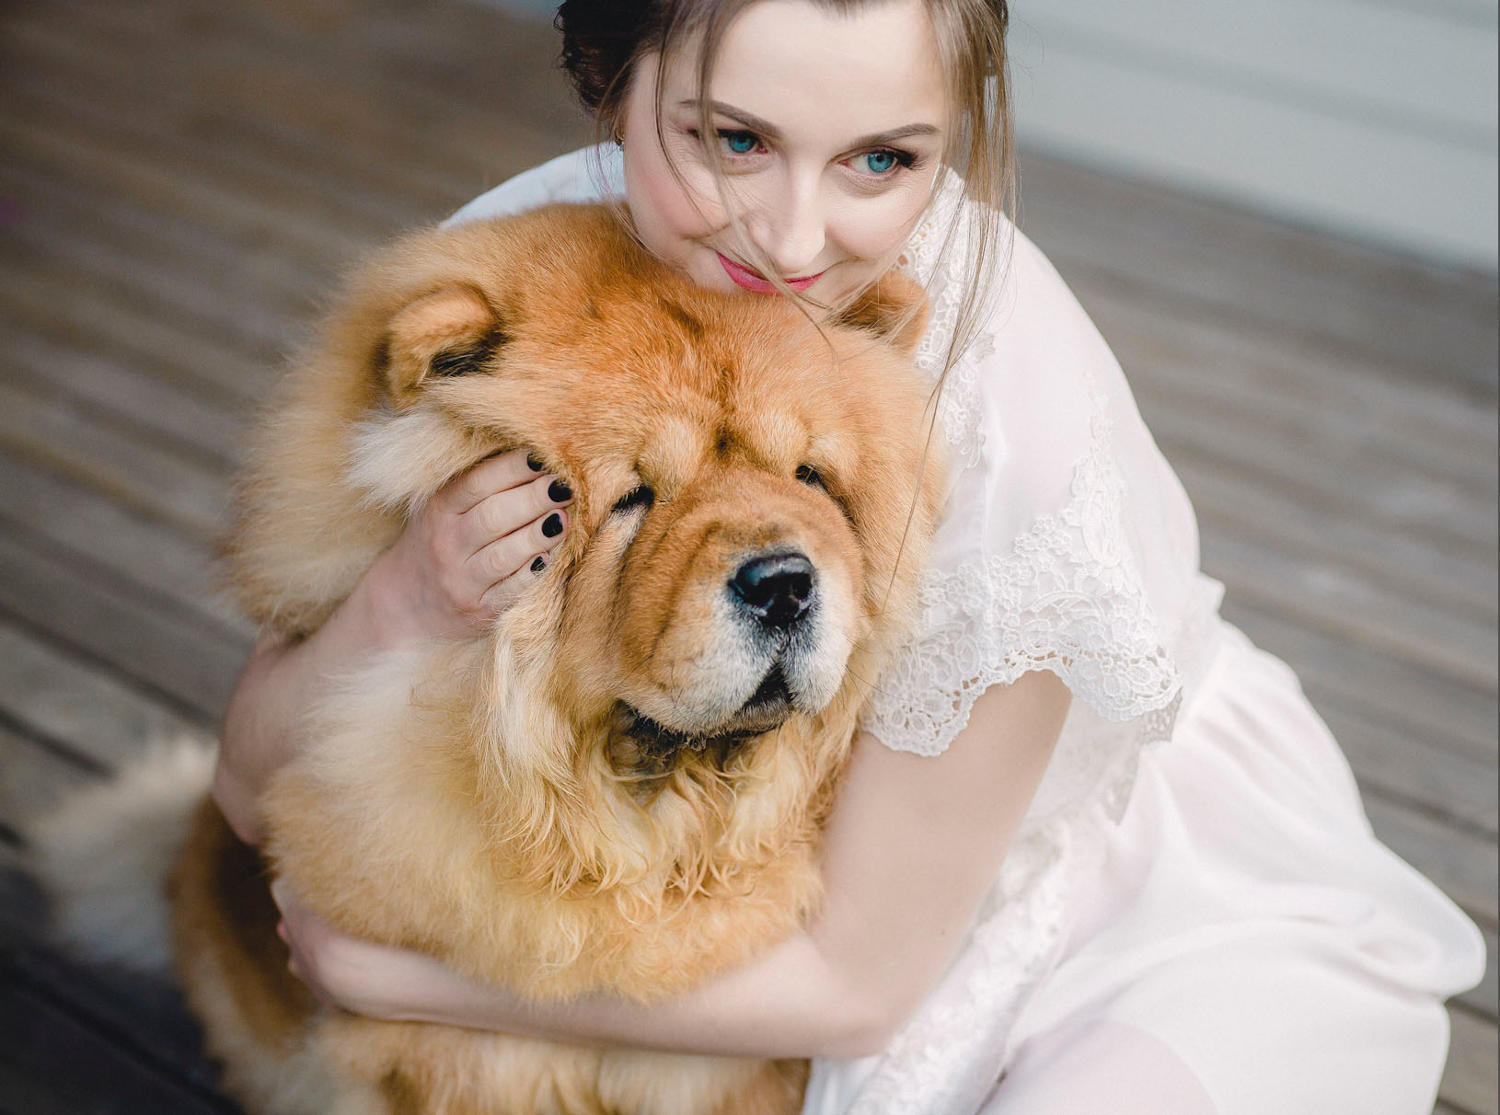 A bride and her best bridesmaid. My dog Velli and I acting as the models. Photo from Klavdia's personal archive.